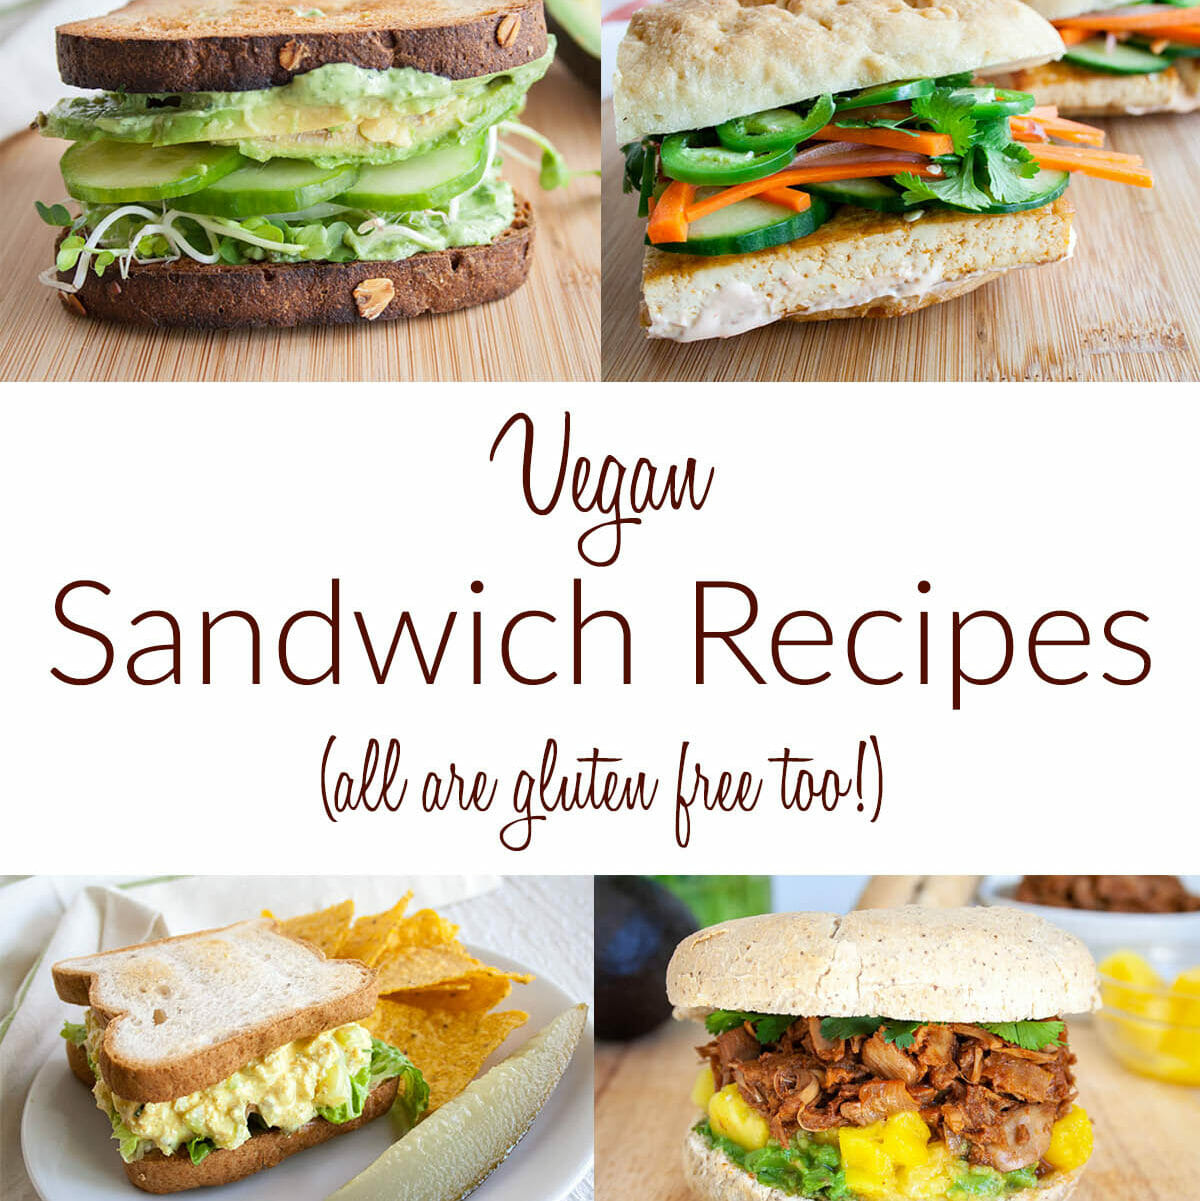 "Vegan Sandwich Recipes" written on collage photo with 6 sandwiches.